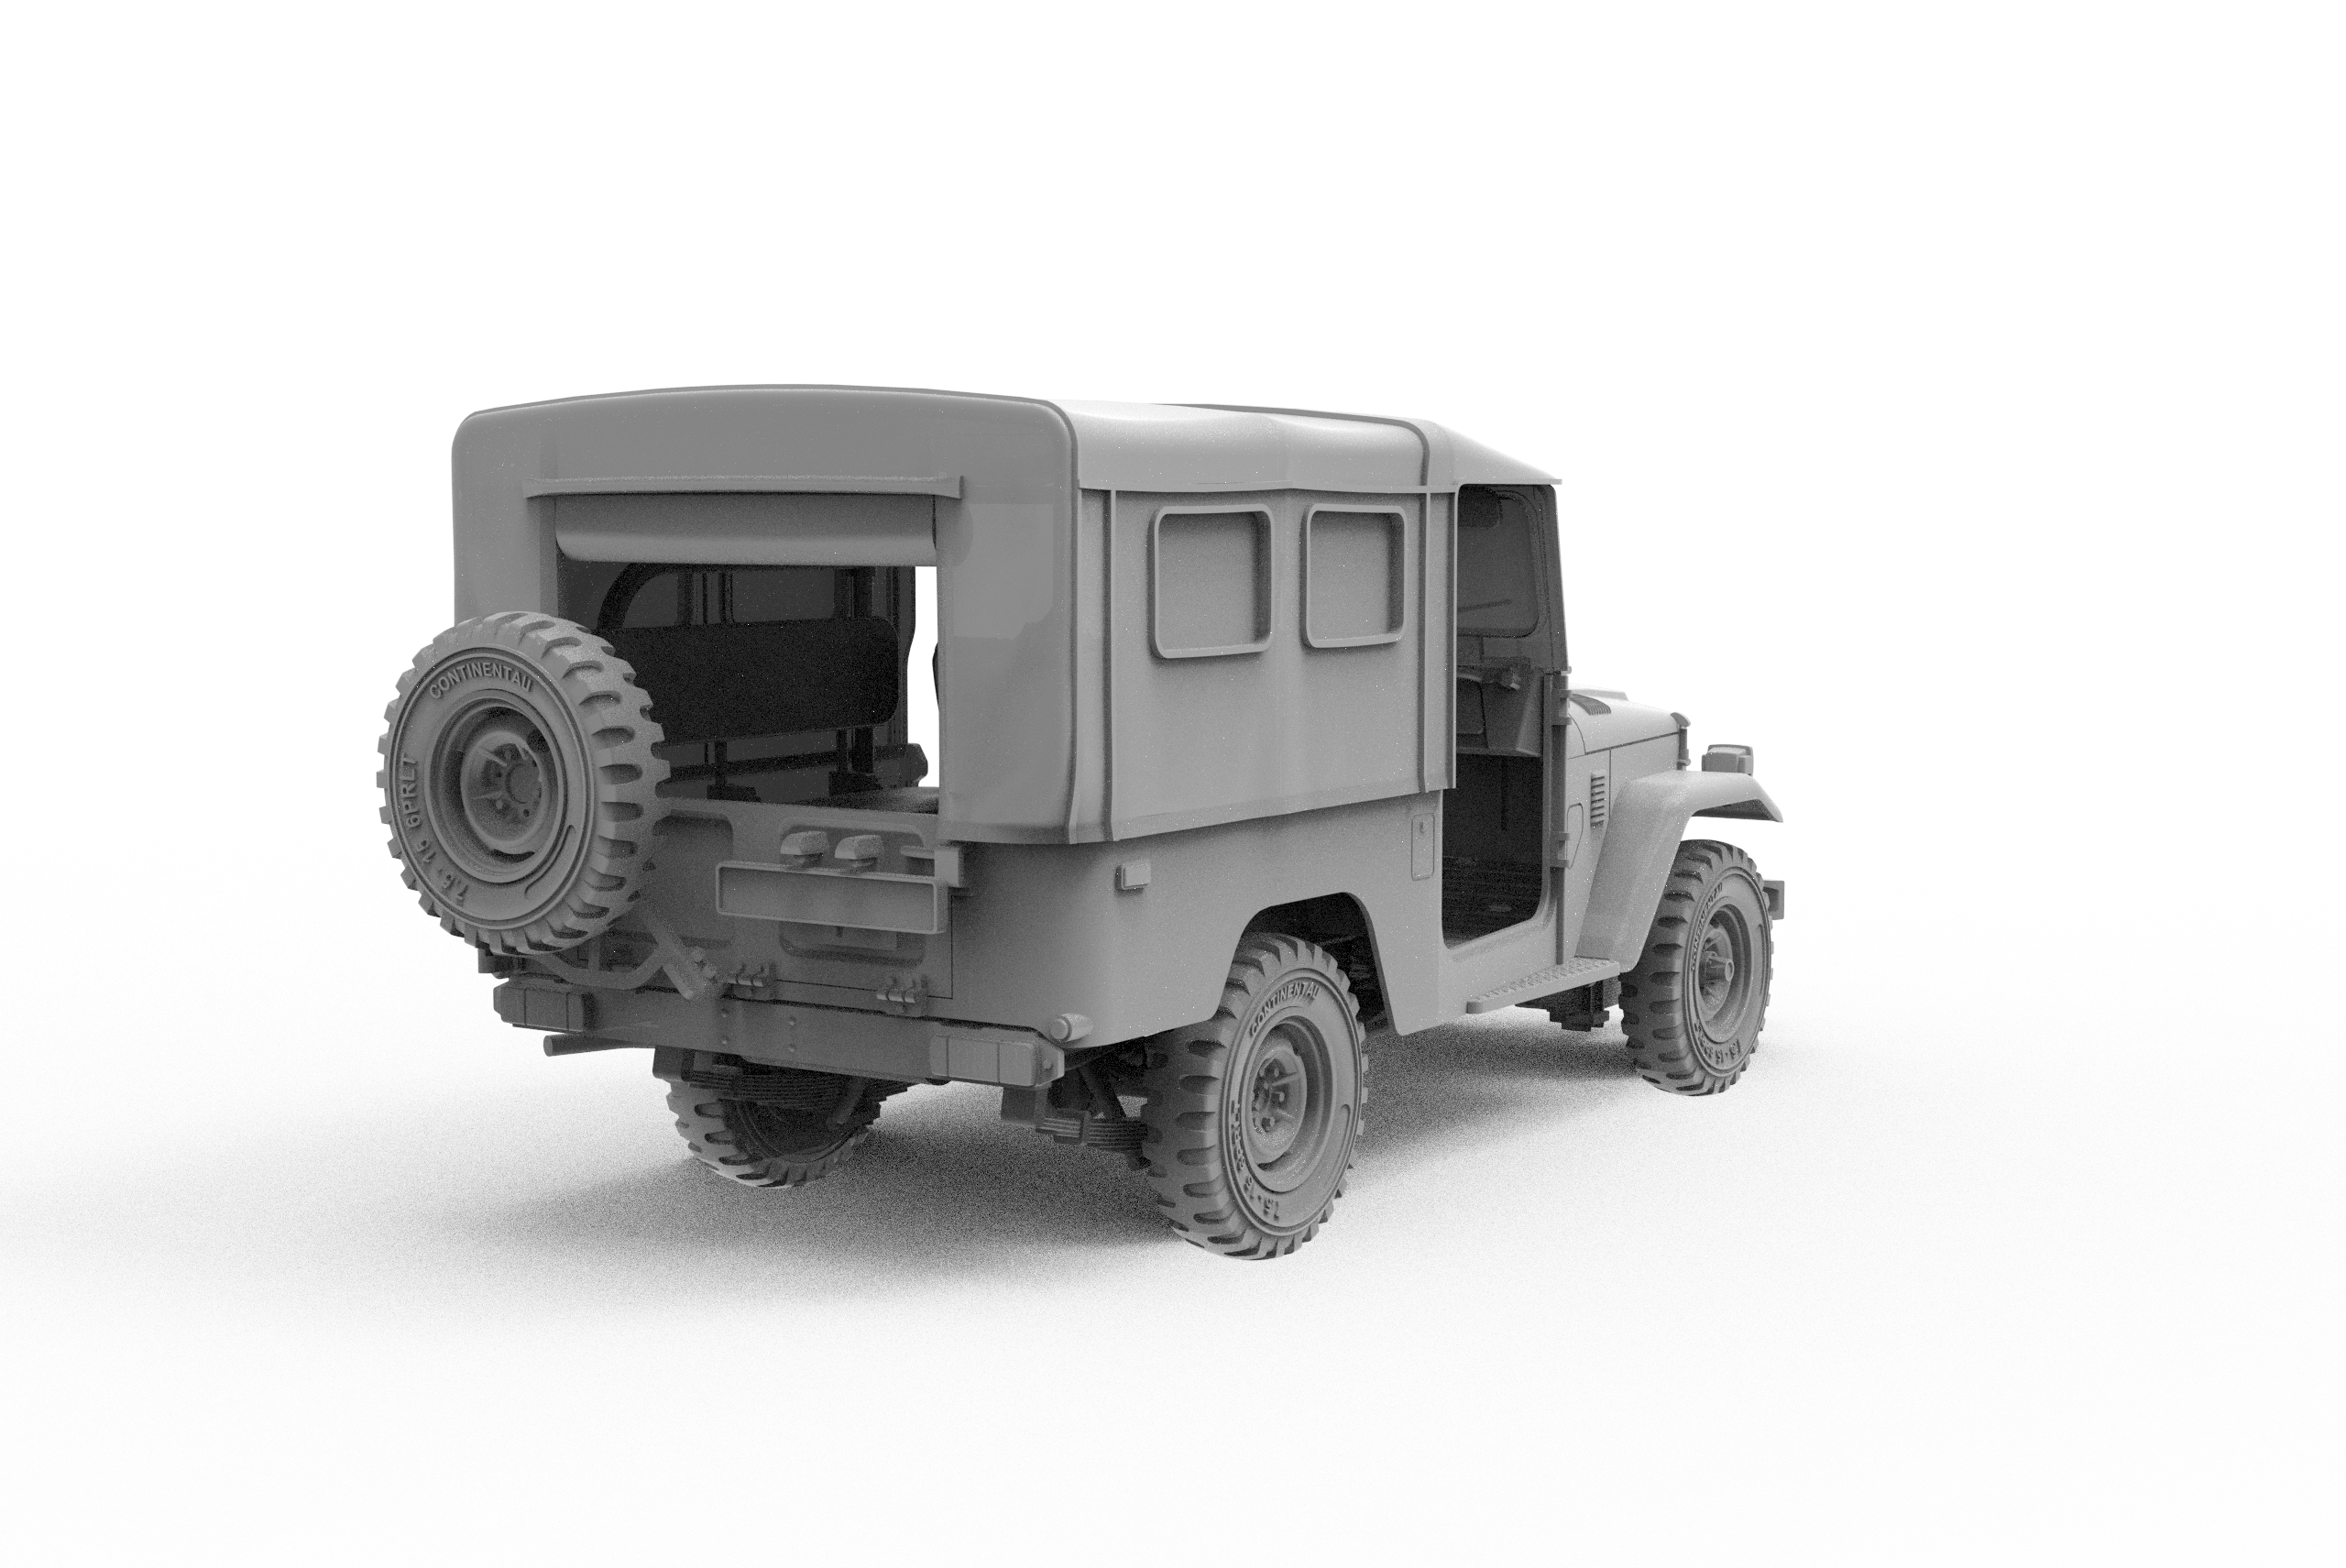 FJ43 SUV with Soft top IDF & LAF 1/35th Scale - Loaded Dice Barry Vale of Glamorgan CF64 3HD